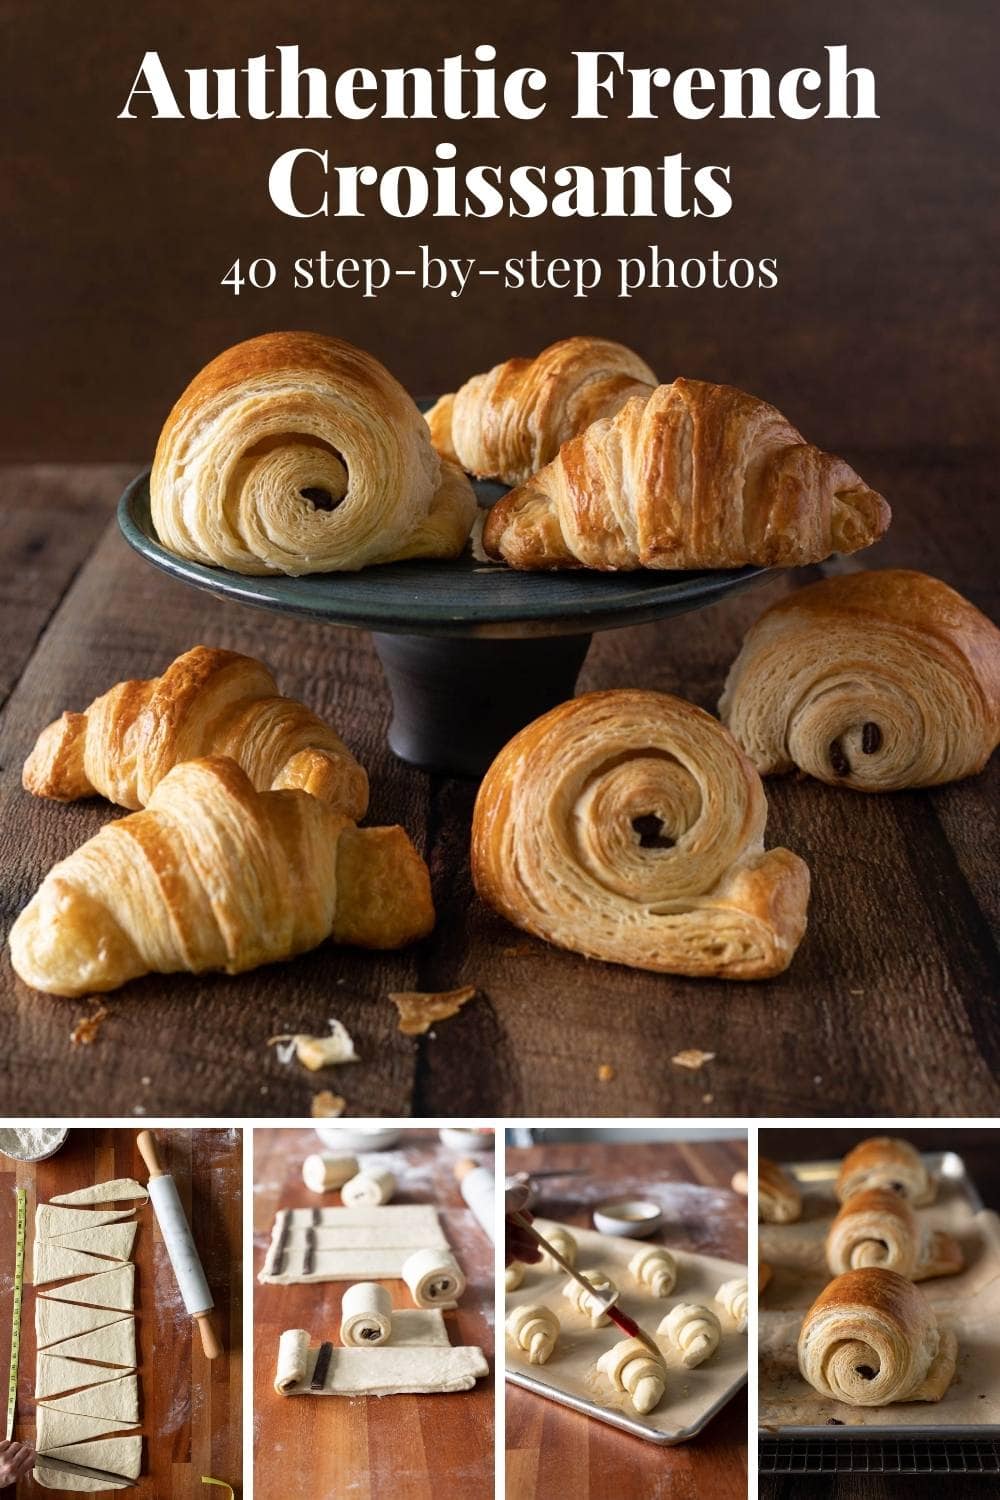 Make authentic French croissants and chocolate croissants with 40 step-by-step photos via @bessiebakes